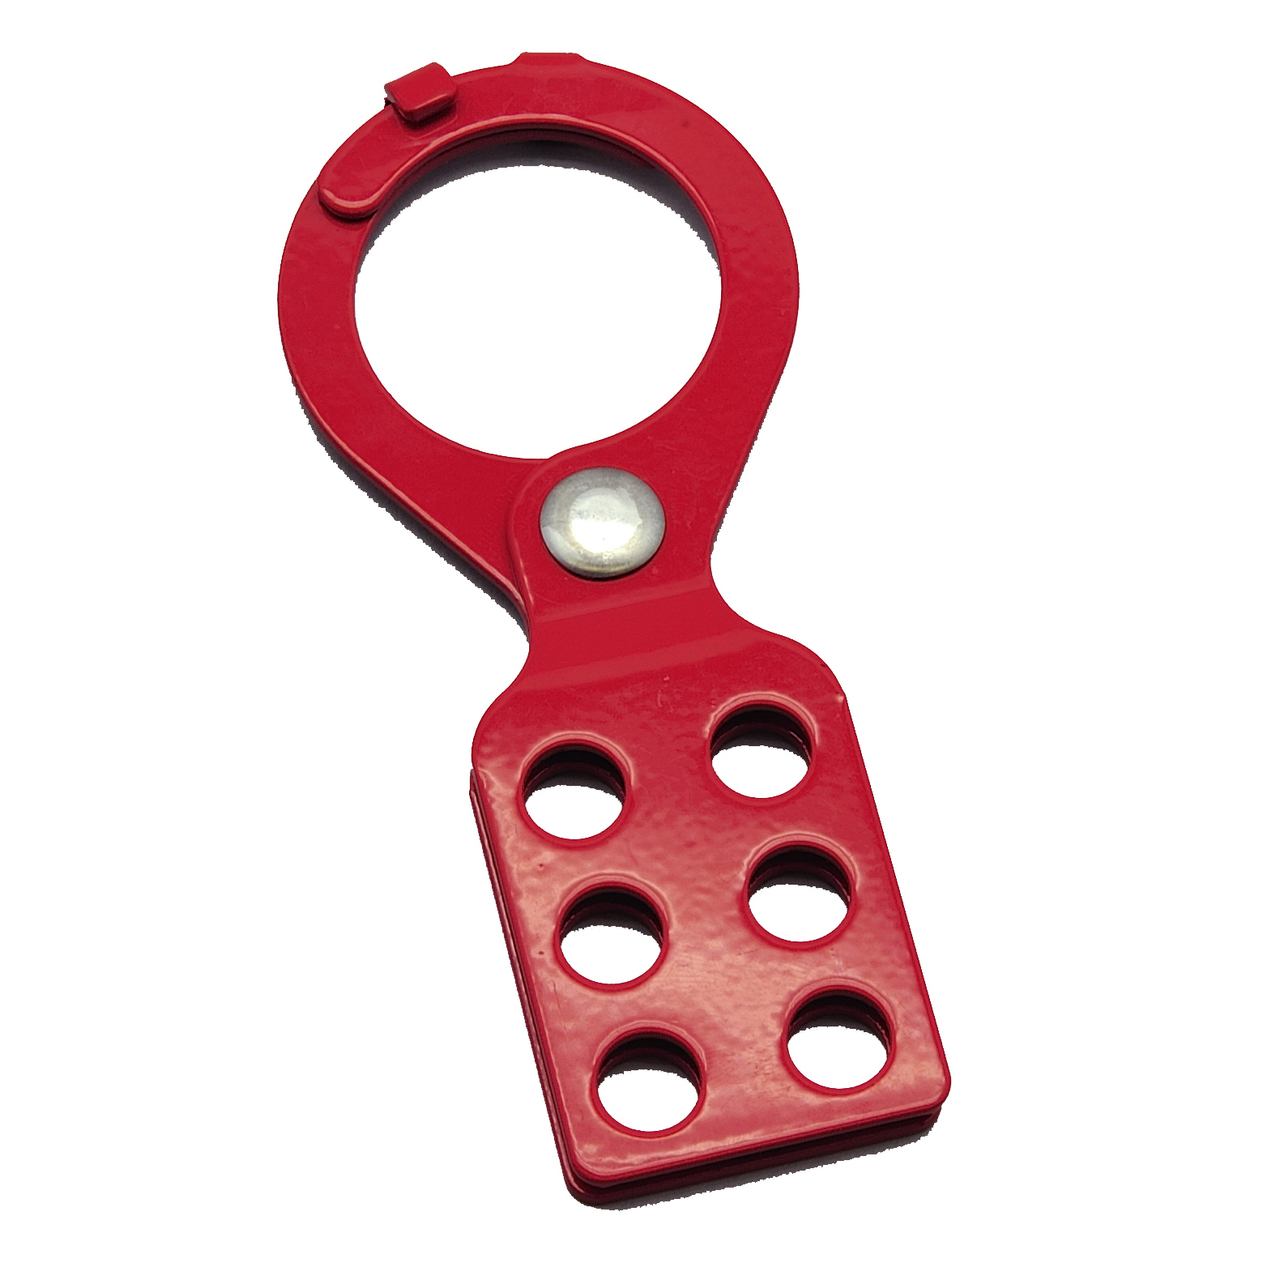 ZING RecycLockout Lockout Tagout Hasp, 1.5 Inch Steel with Tabs